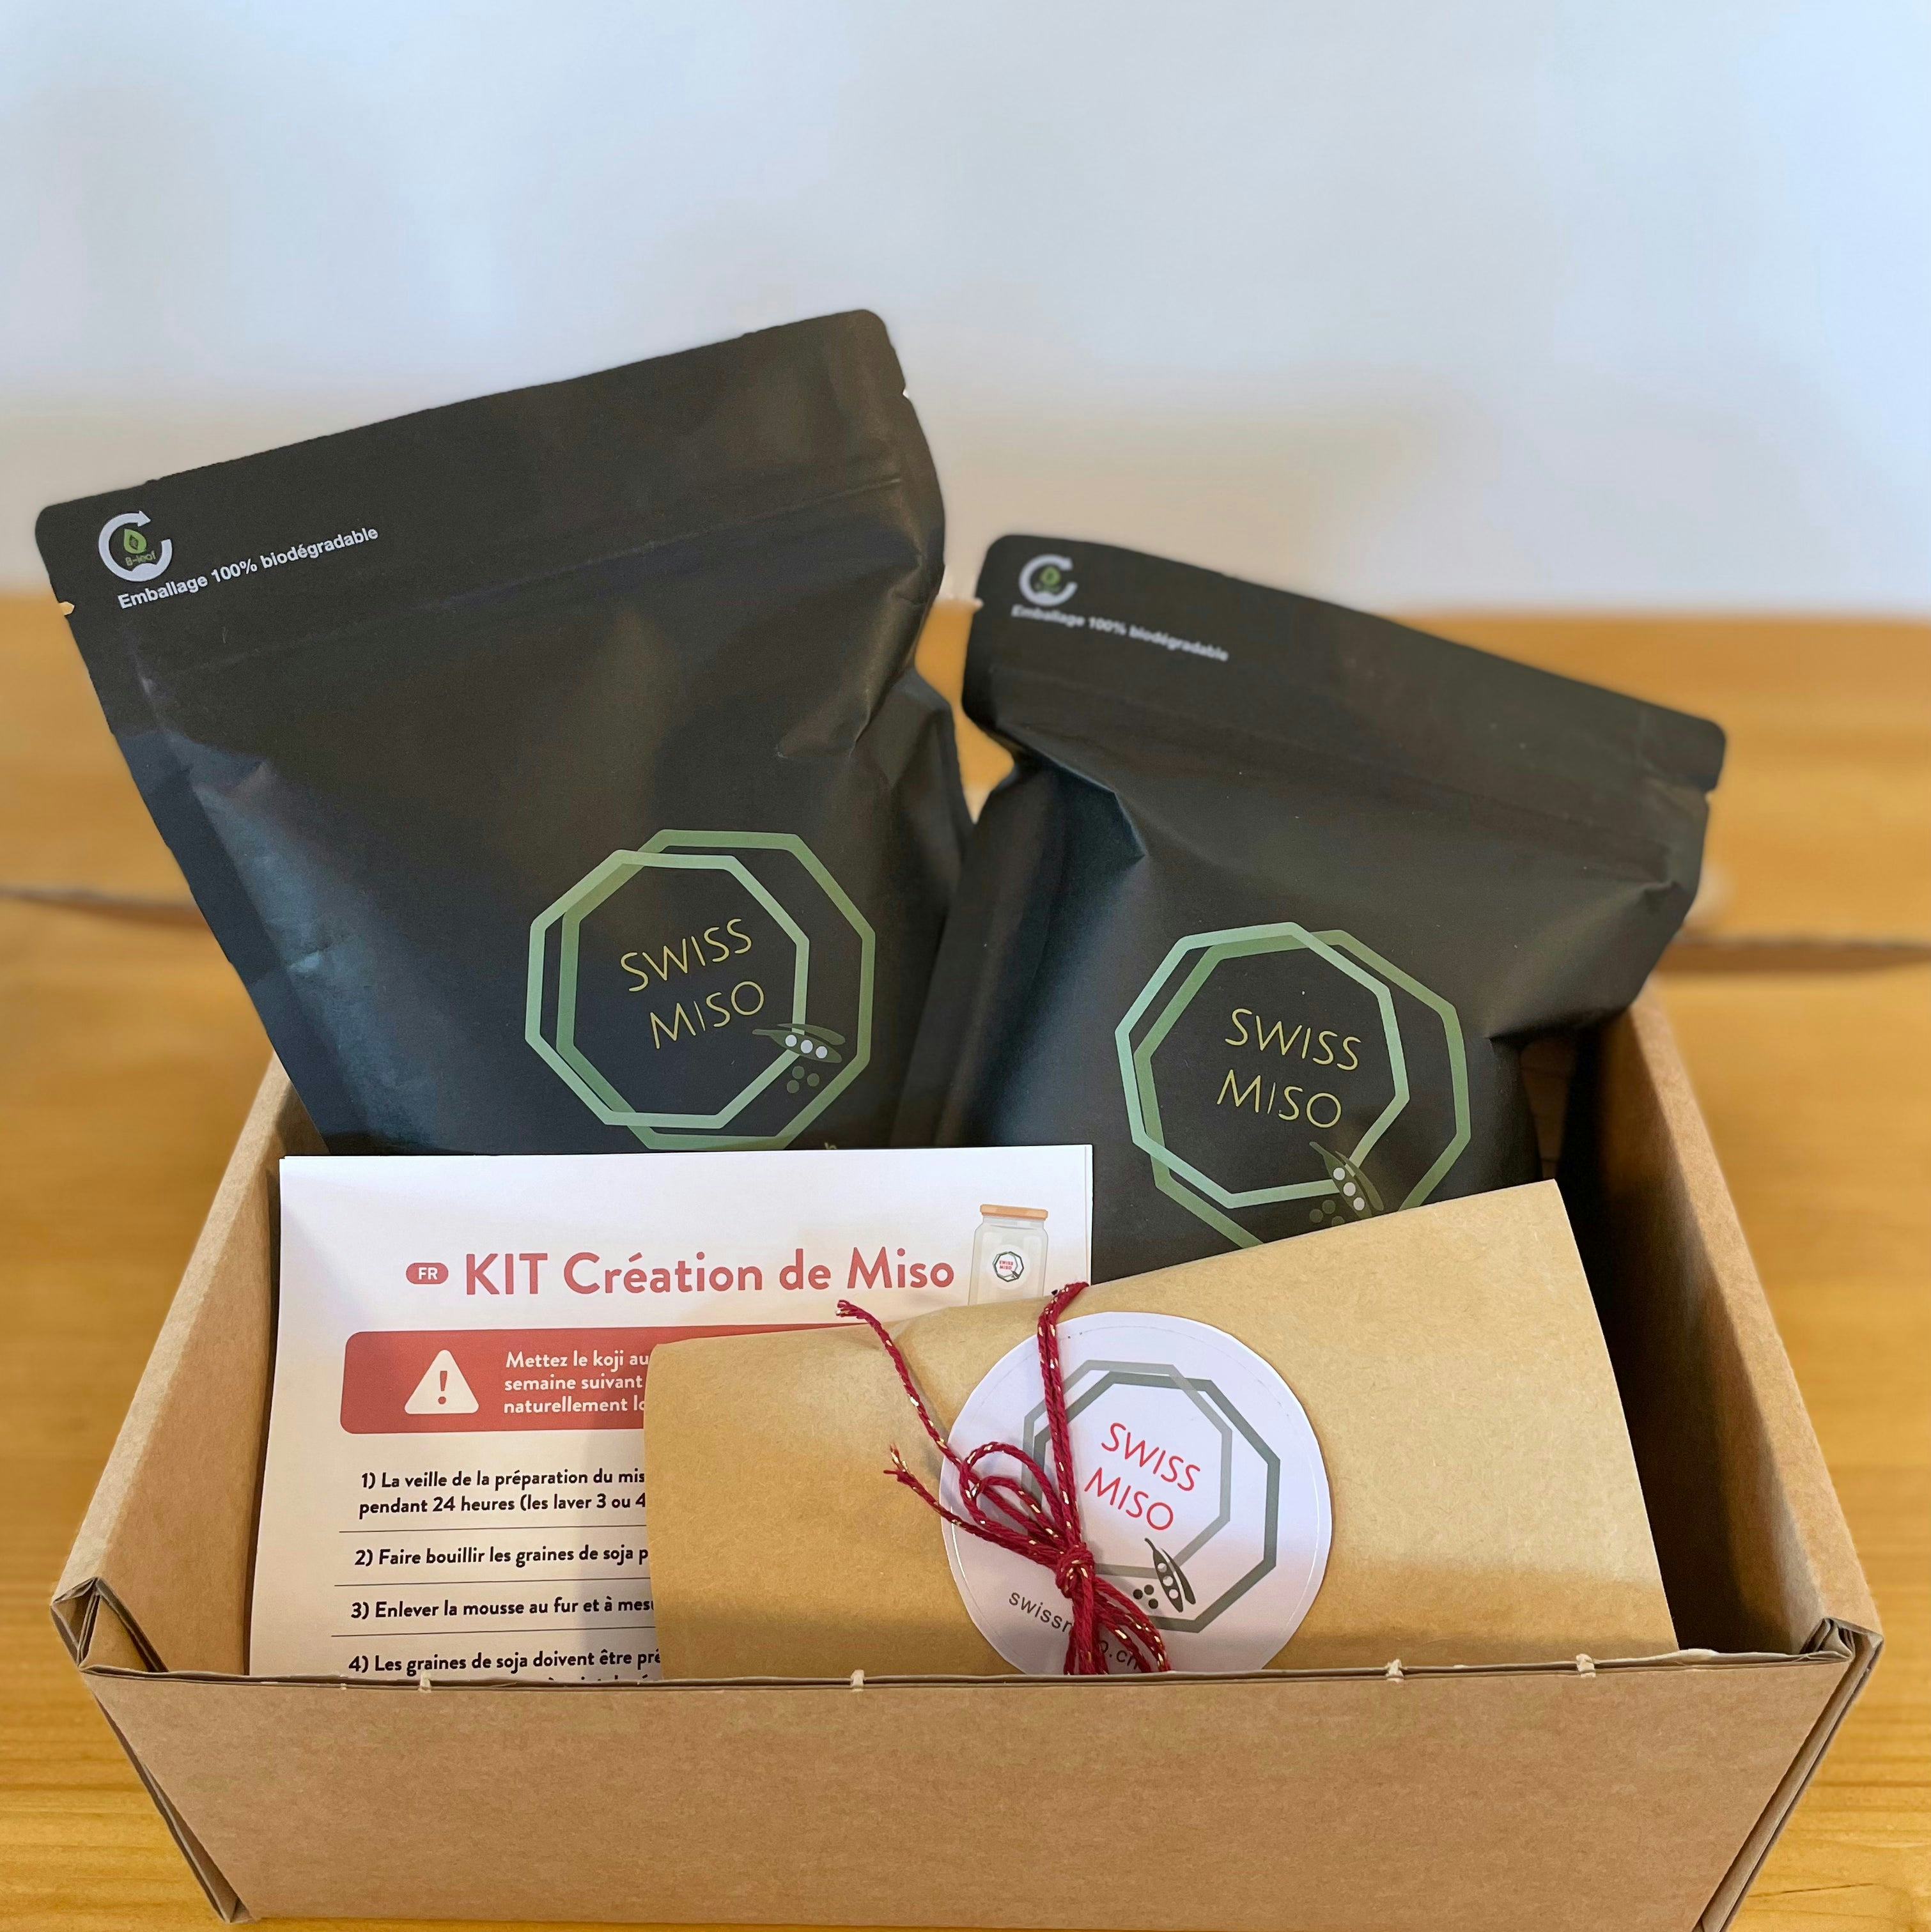 KIT Création de miso, artisanal product for direct sale in Switzerland